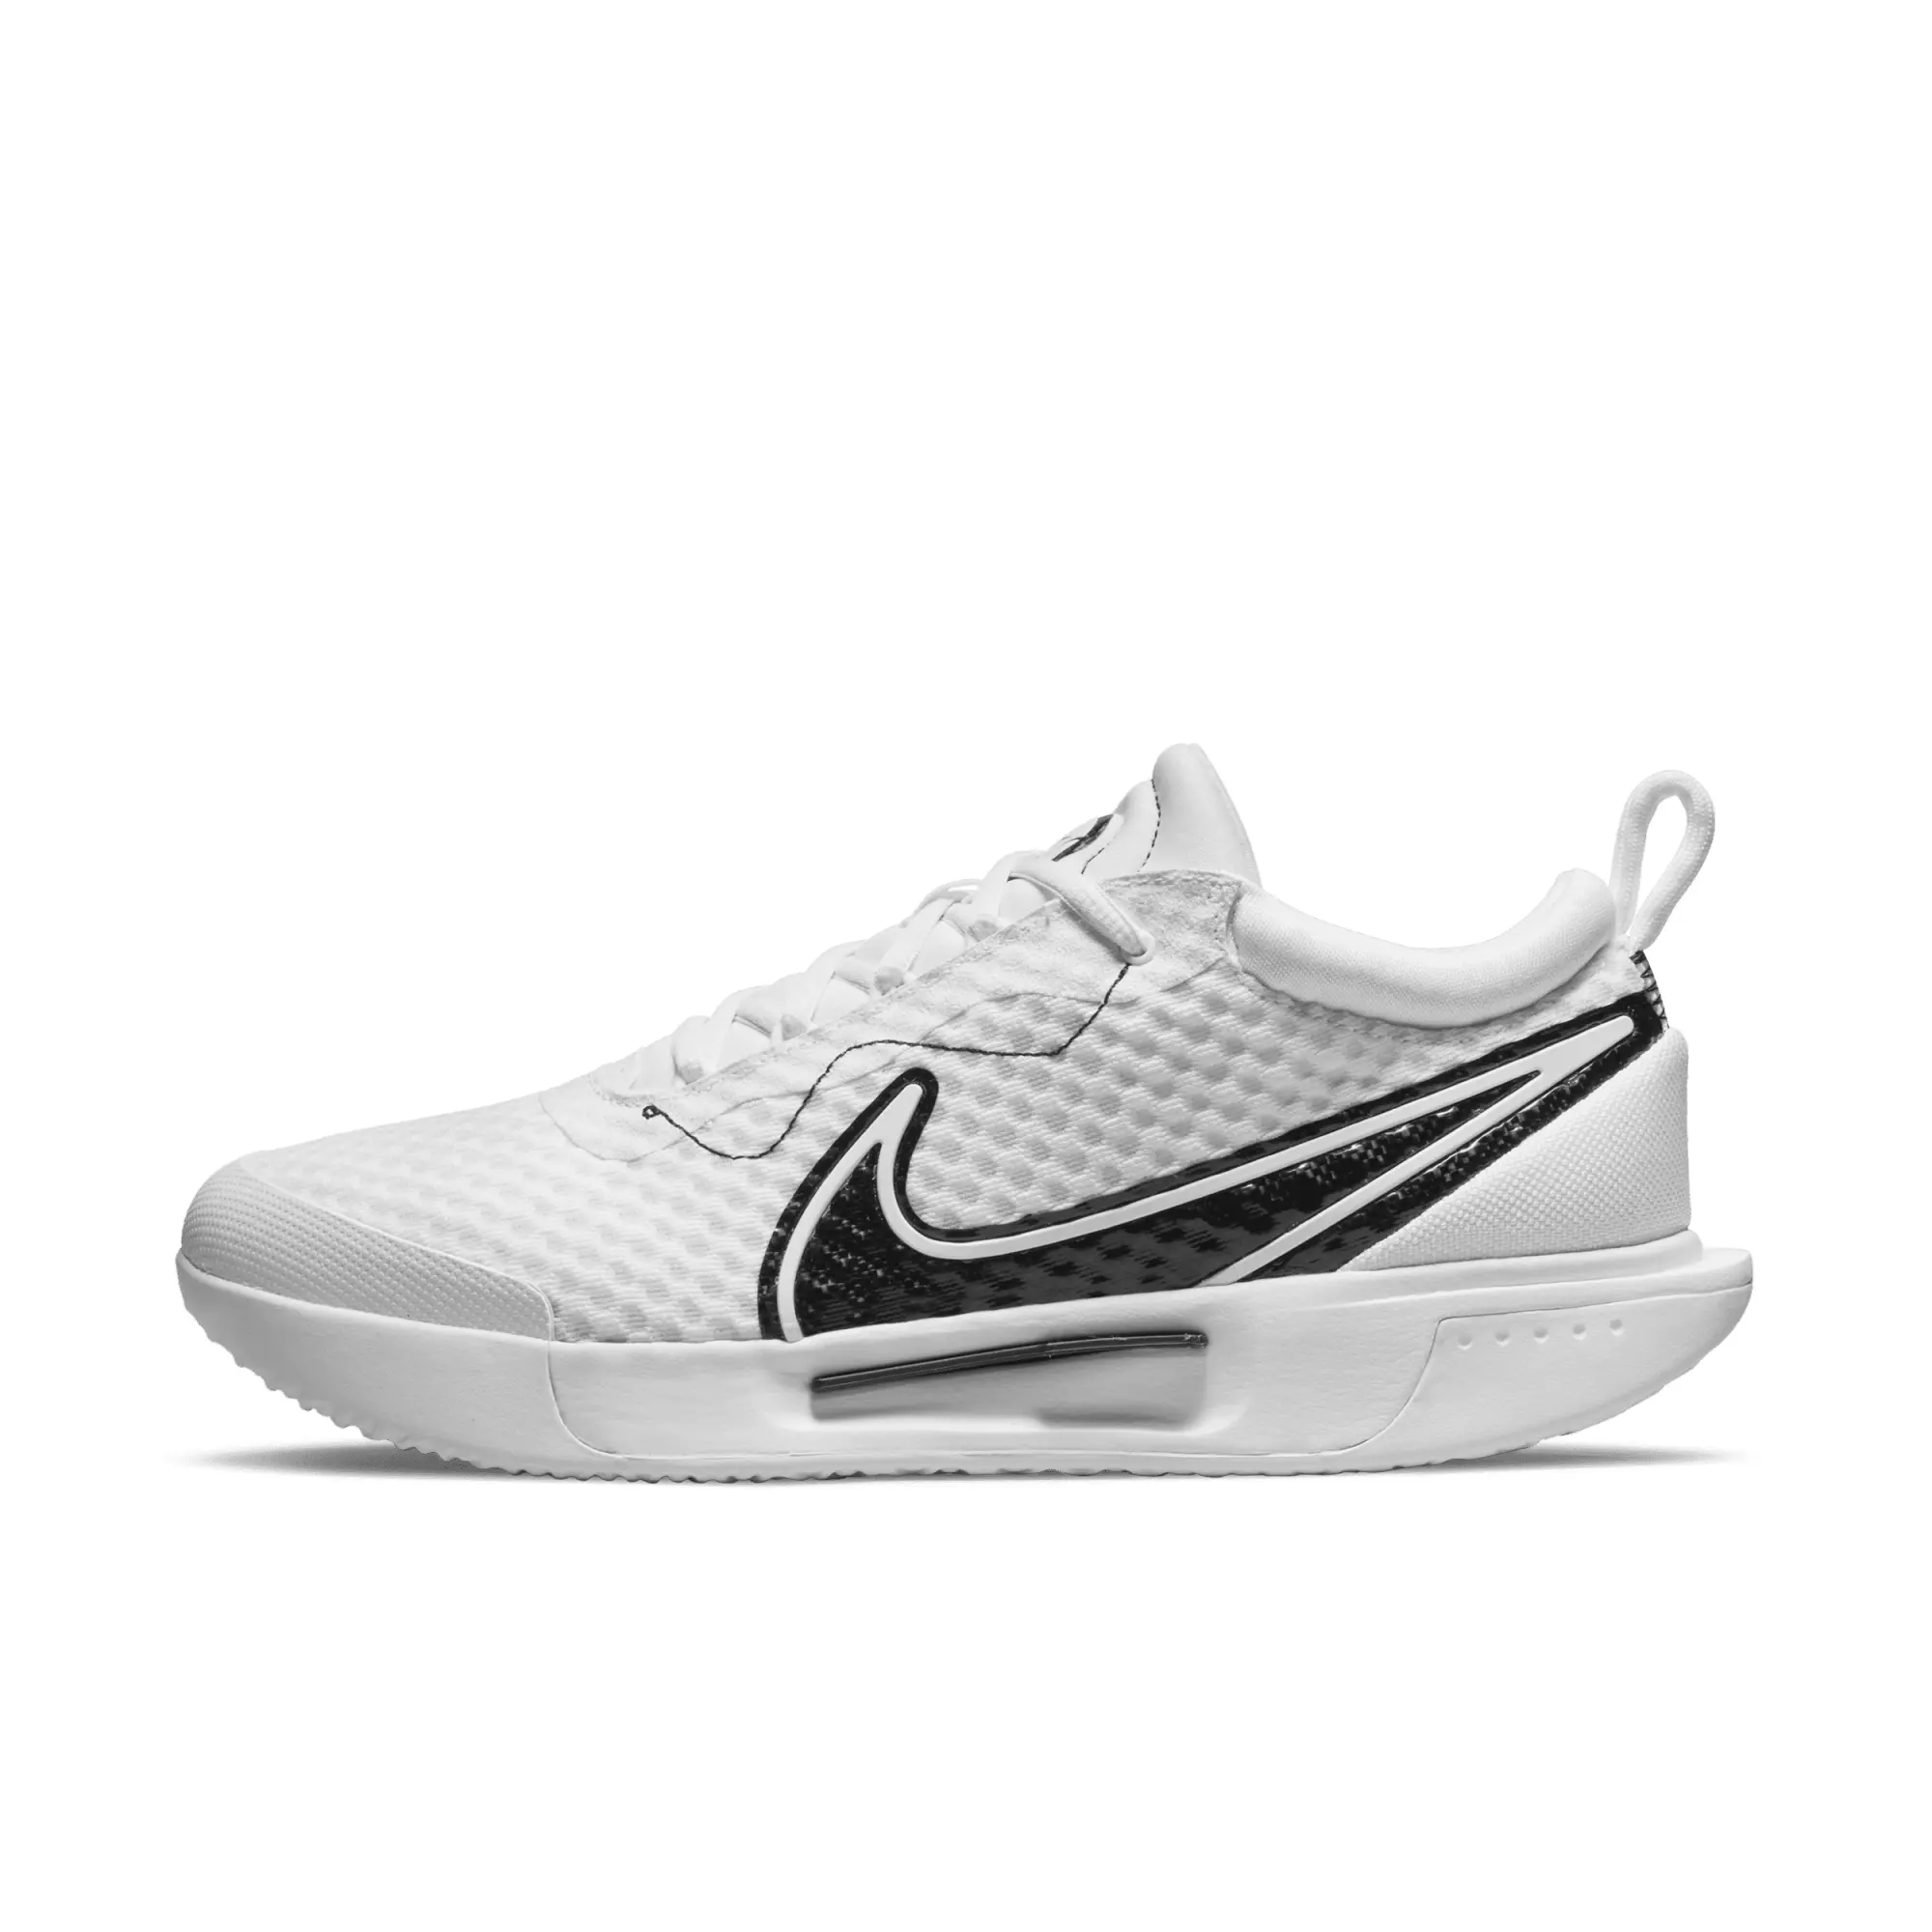 Nike Court Zoom Pro Mens Hard Court Tennis Shoes